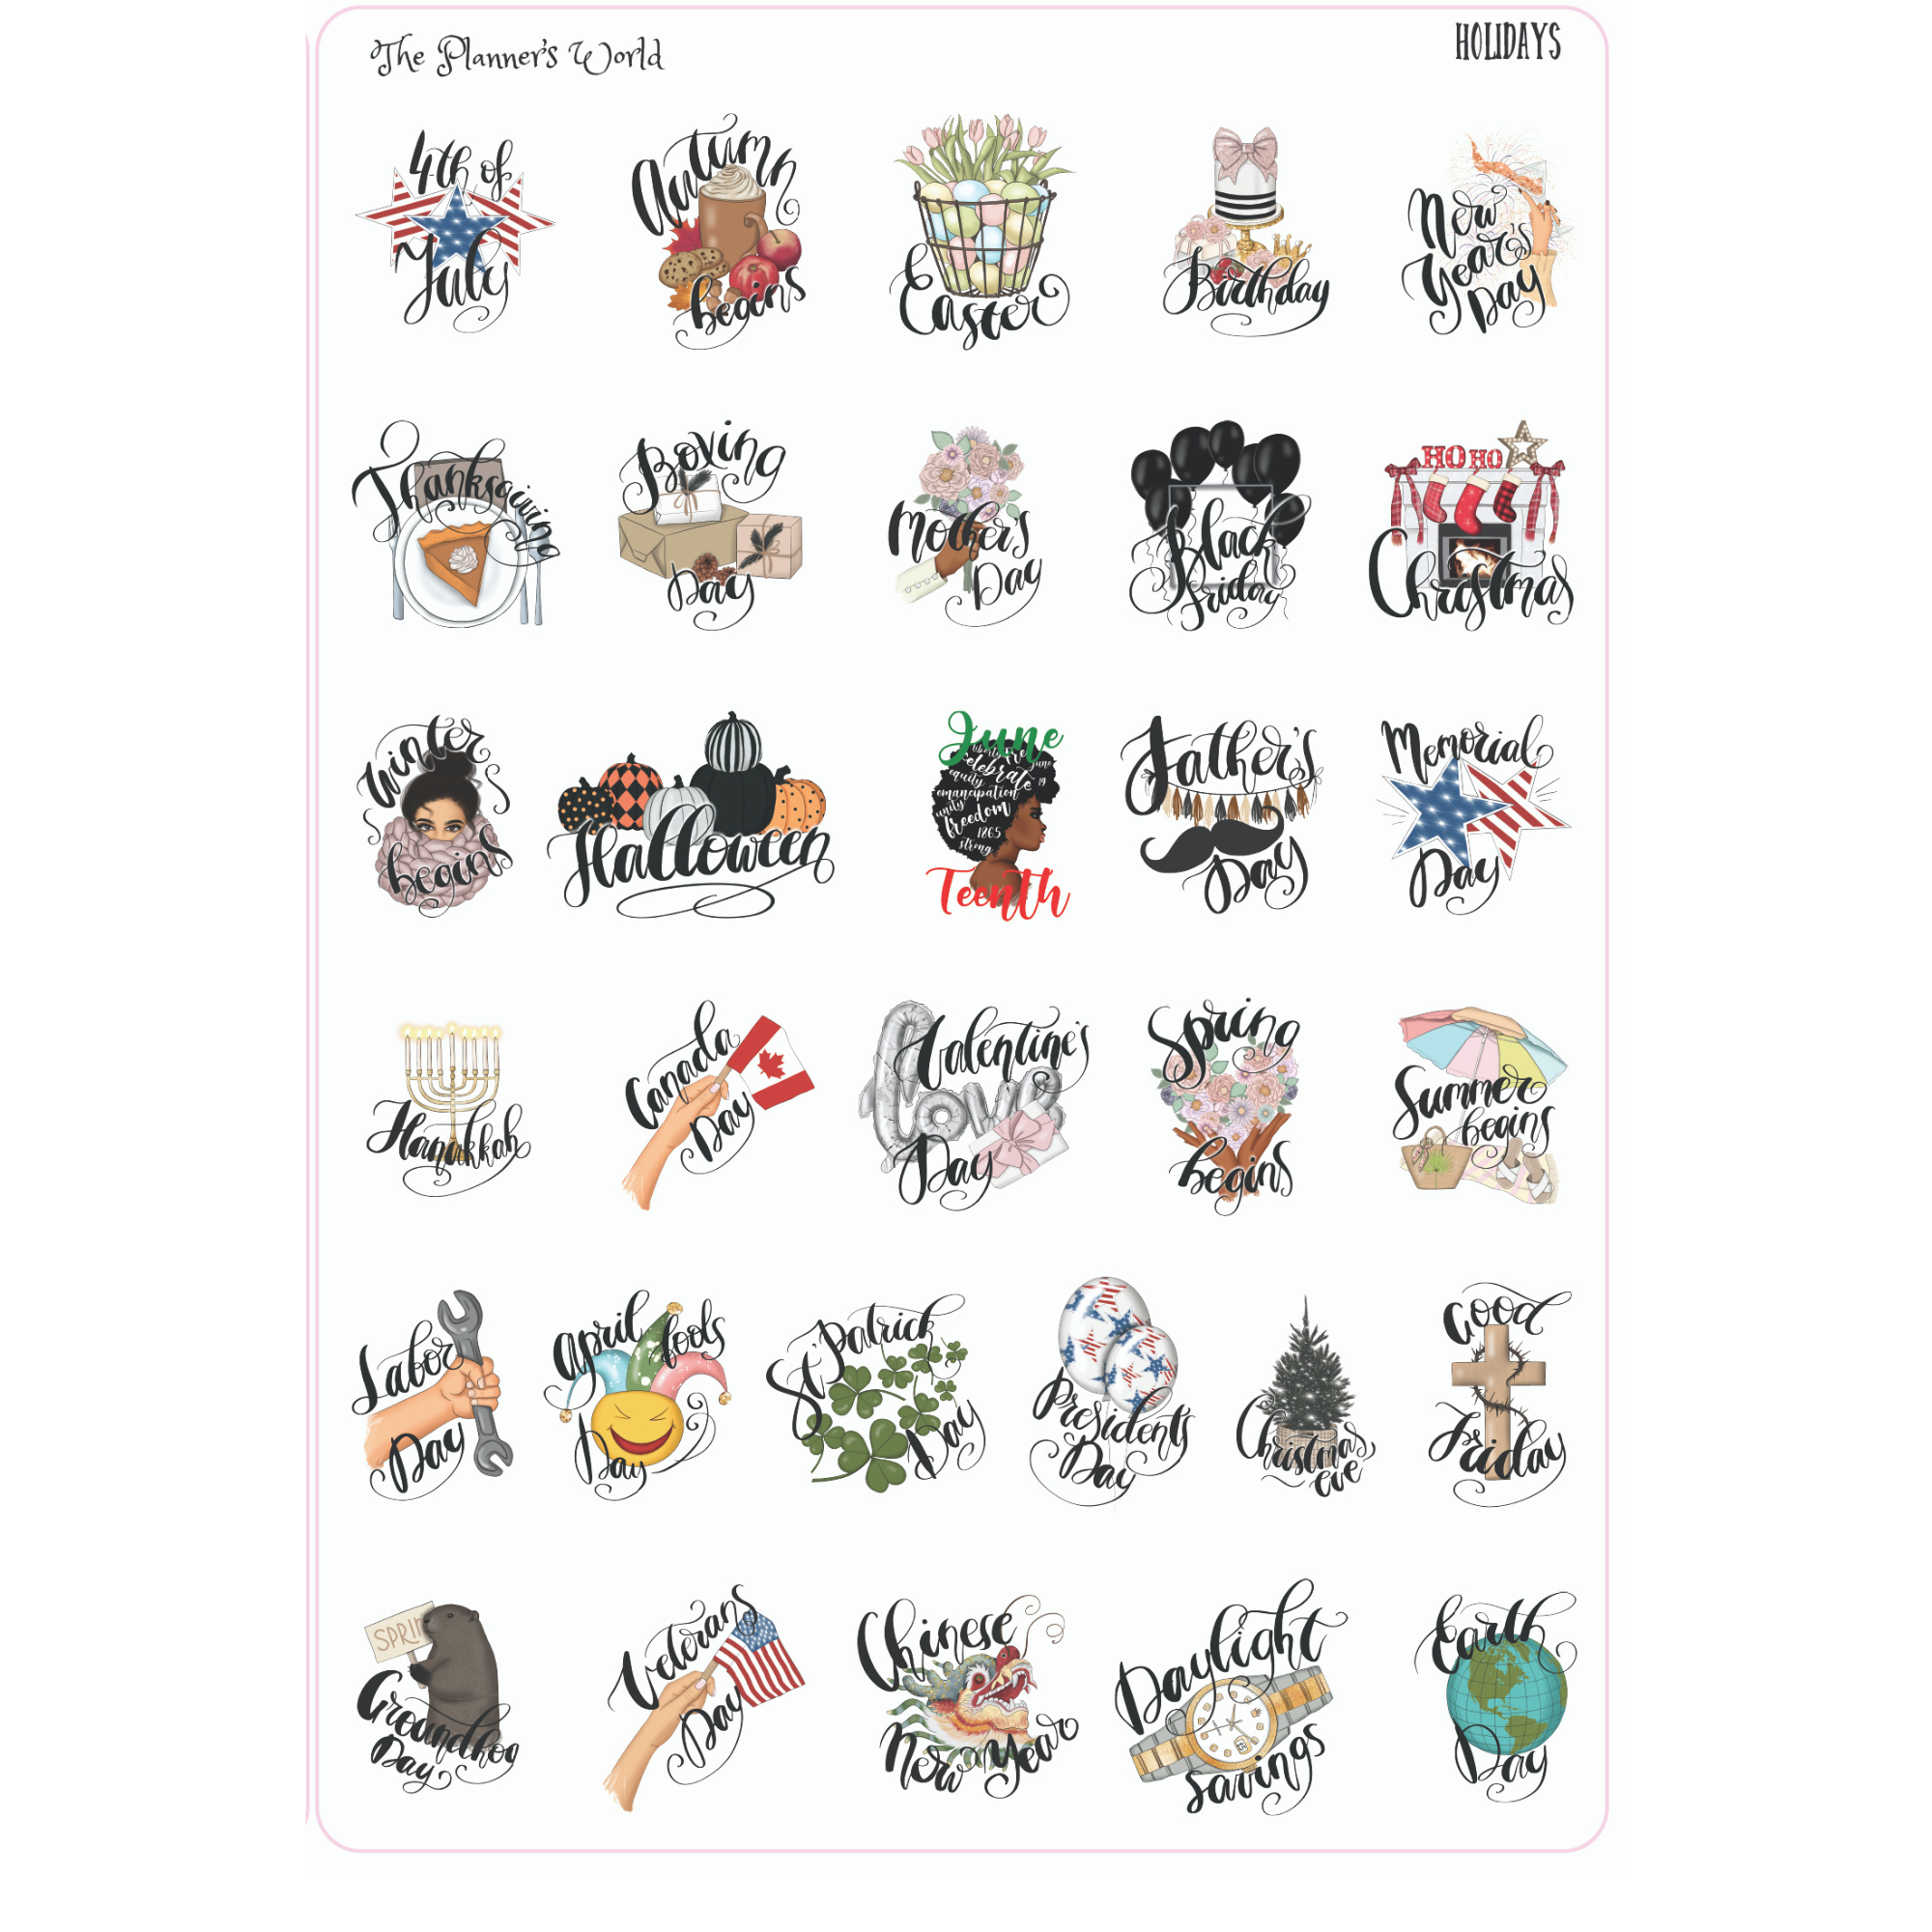 Annual Holidays Planner Stickers -   Holiday planner stickers,  Printable planner stickers, Planner stickers